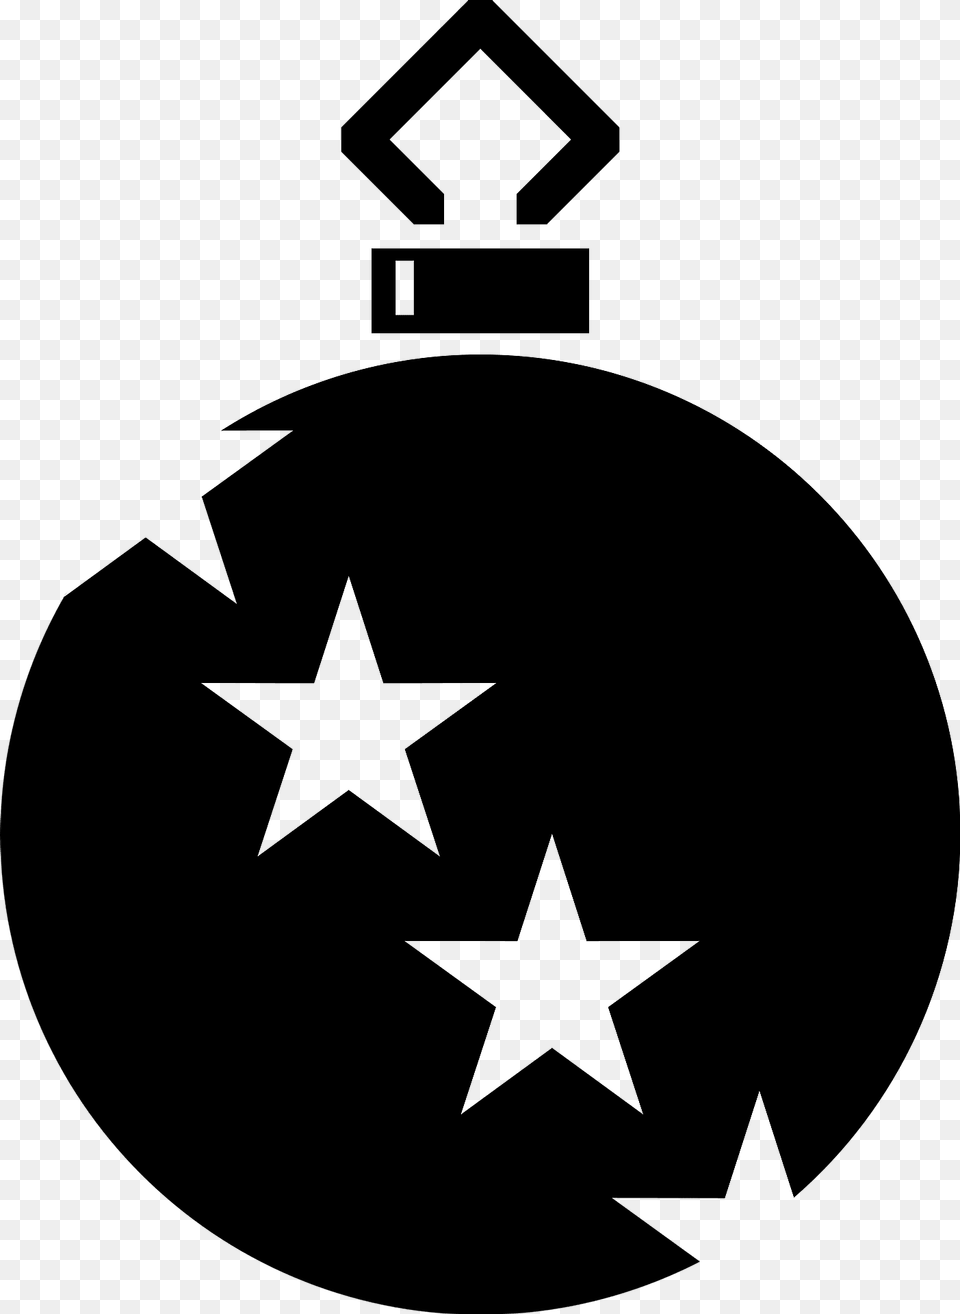 Simple Christmas Ornament Black And White With Star Pattern Clipart, Ammunition, Bomb, Weapon, Symbol Free Transparent Png